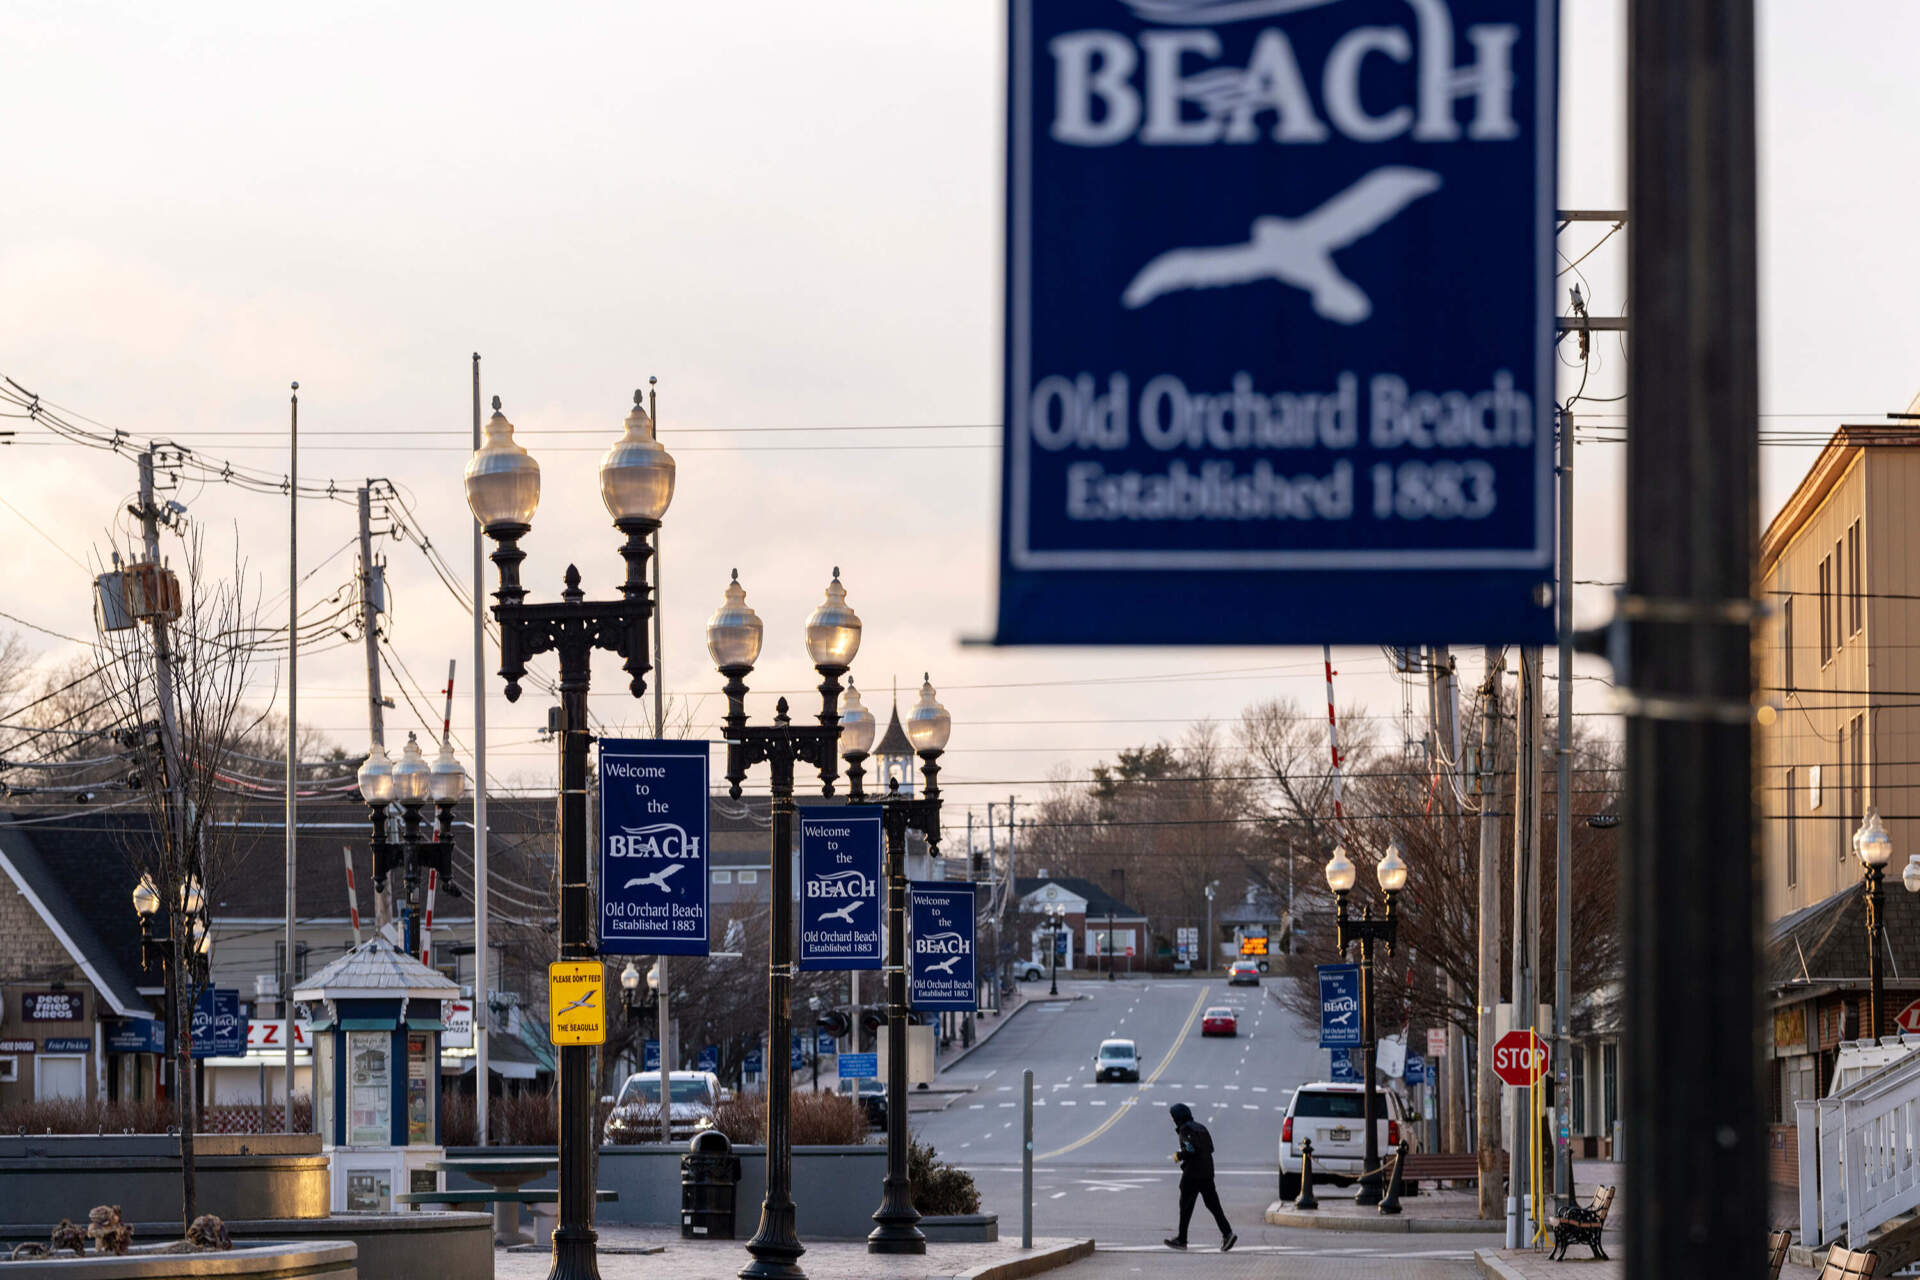 Old Orchard Beach in York County, which includes wealthy coastal towns that help make up Maine’s largest metropolitan area. (Ashley L. Conti for The New York Times)